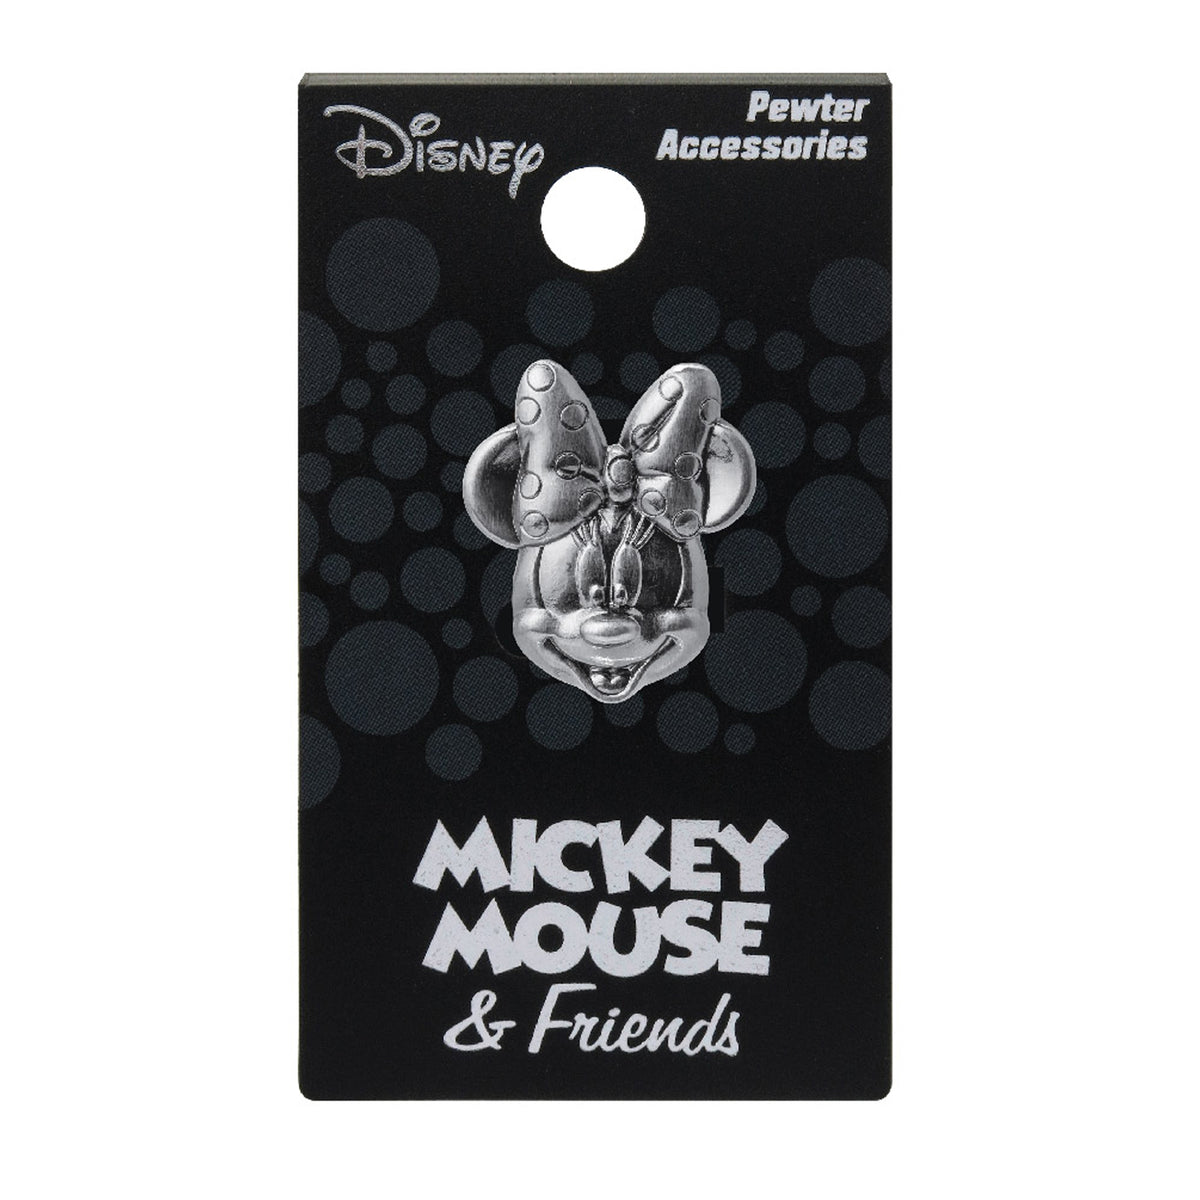 Disney Minnie Mouse Collectible Pin